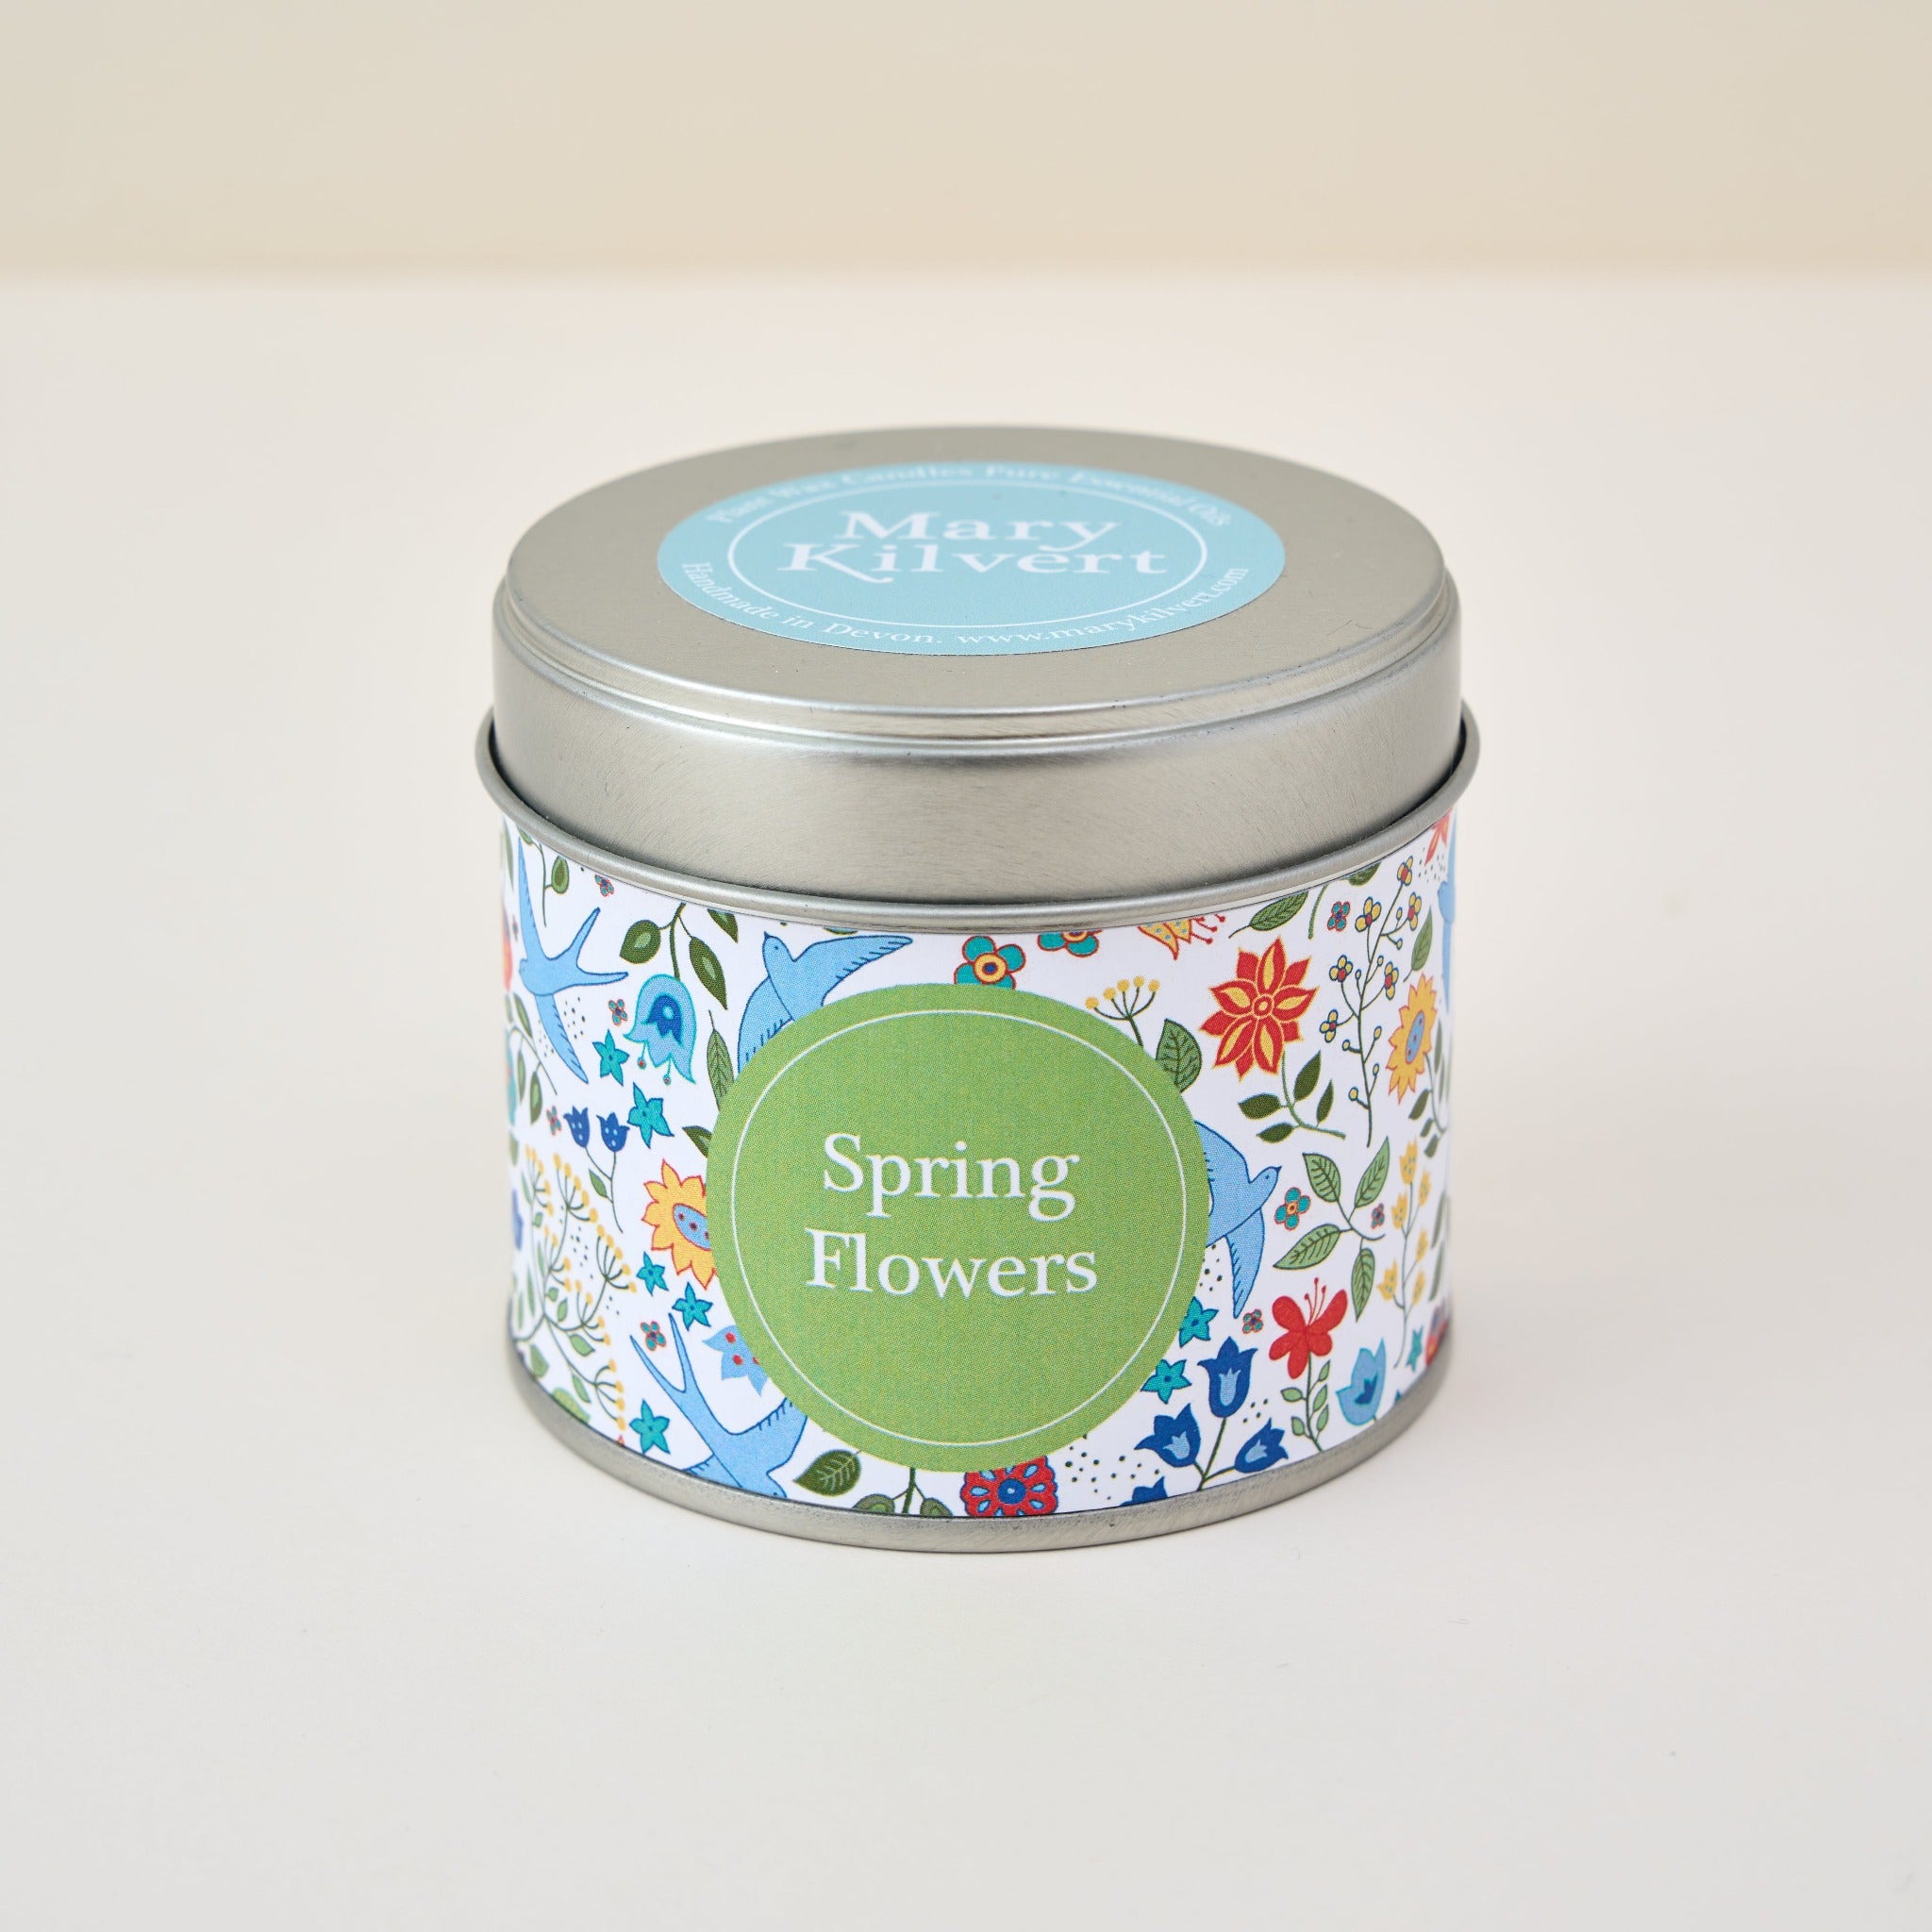 Spring Flowers Candle by Mary Kilvert